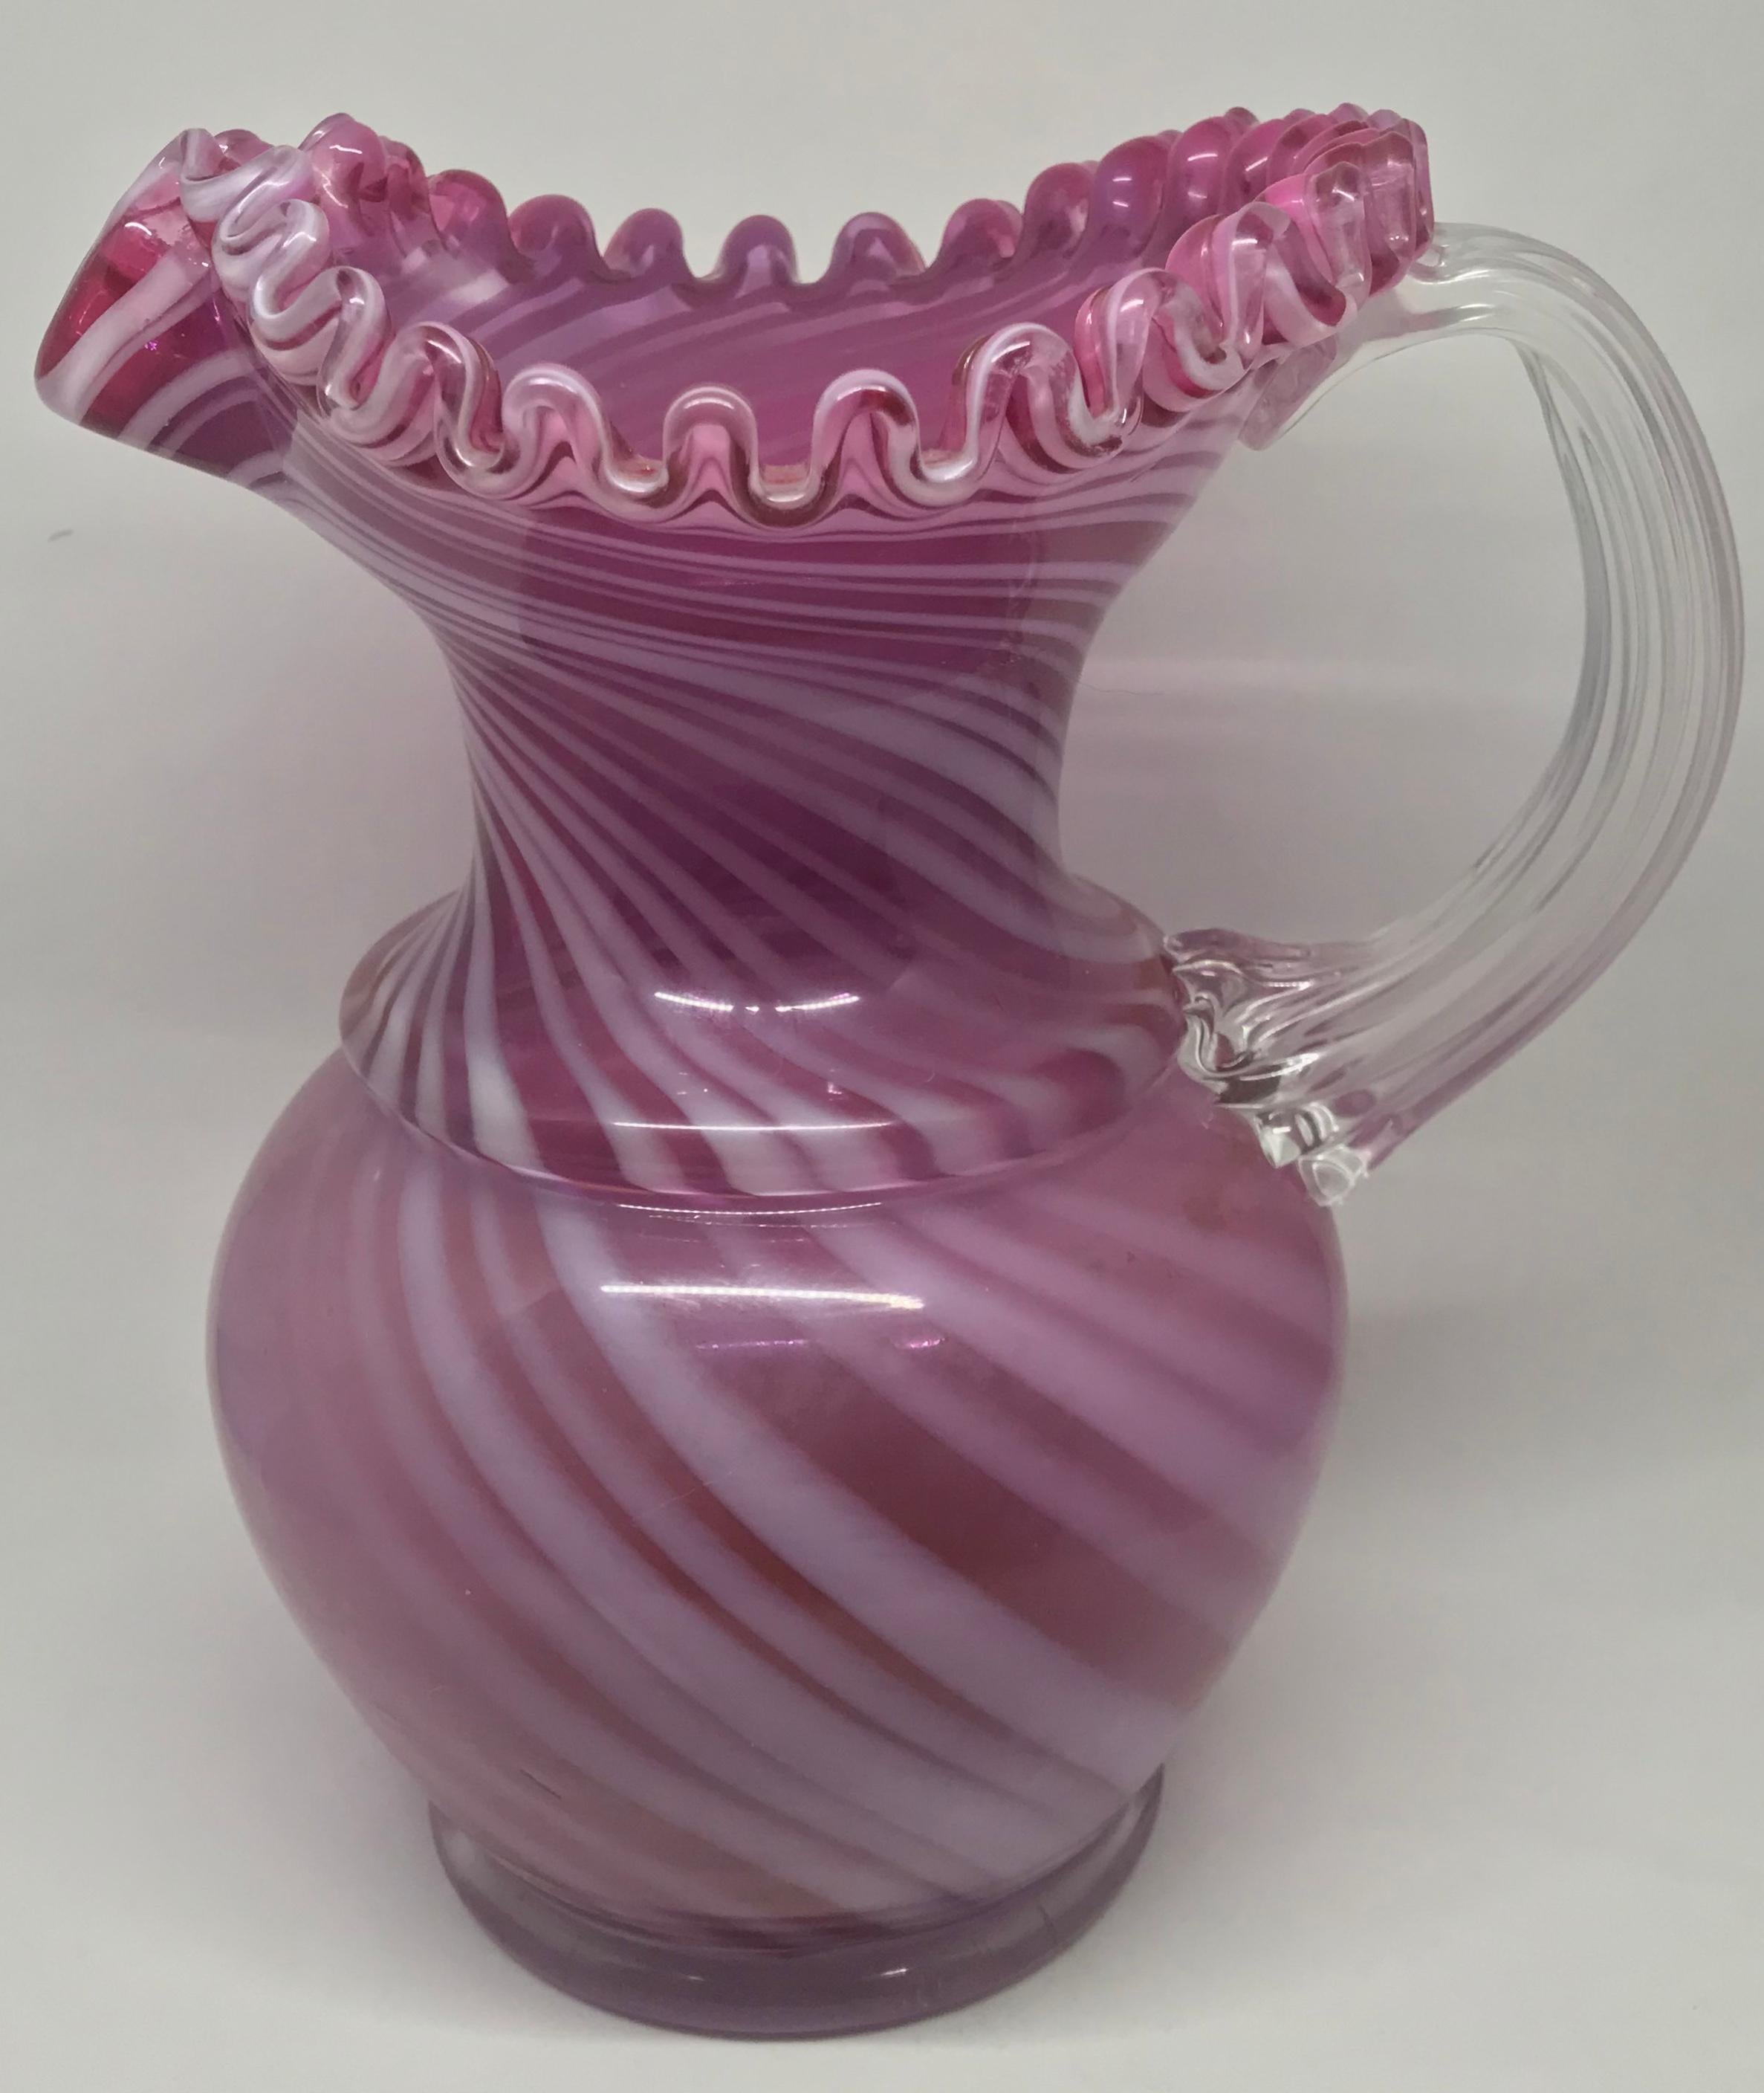 Pink and white striped pitcher. Large American hand blown glass pitcher in rose pink with white striping, ruffled rim and clear glass handle. United States, circa 1900.
Dimensions: 9.5